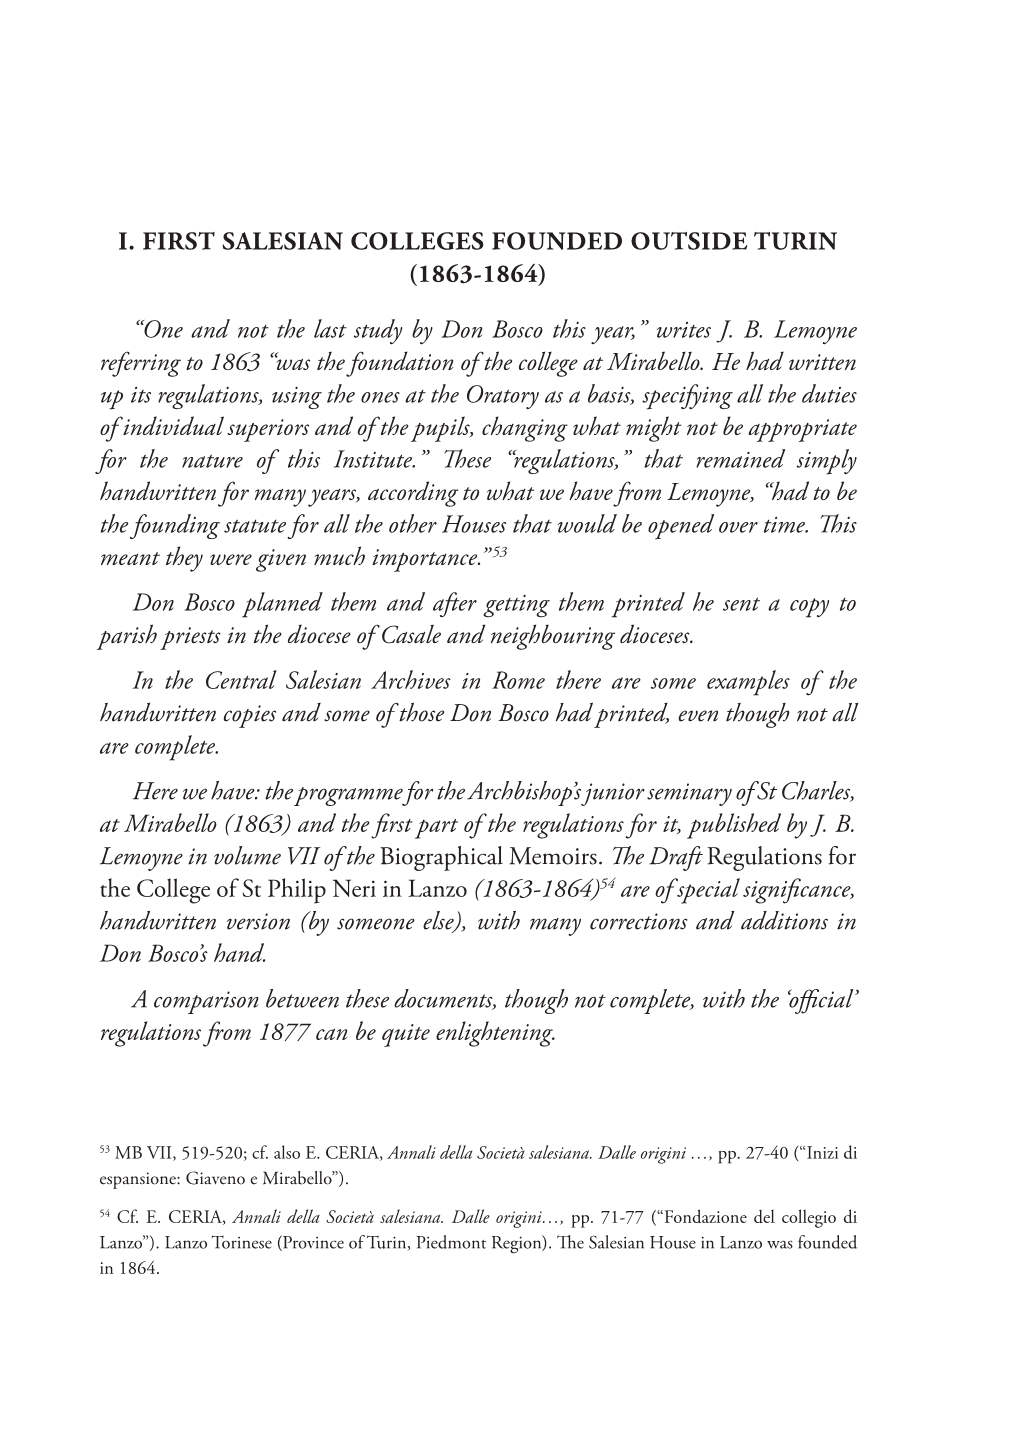 I. First Salesian Colleges Founded Outside Turin (1863-1864)